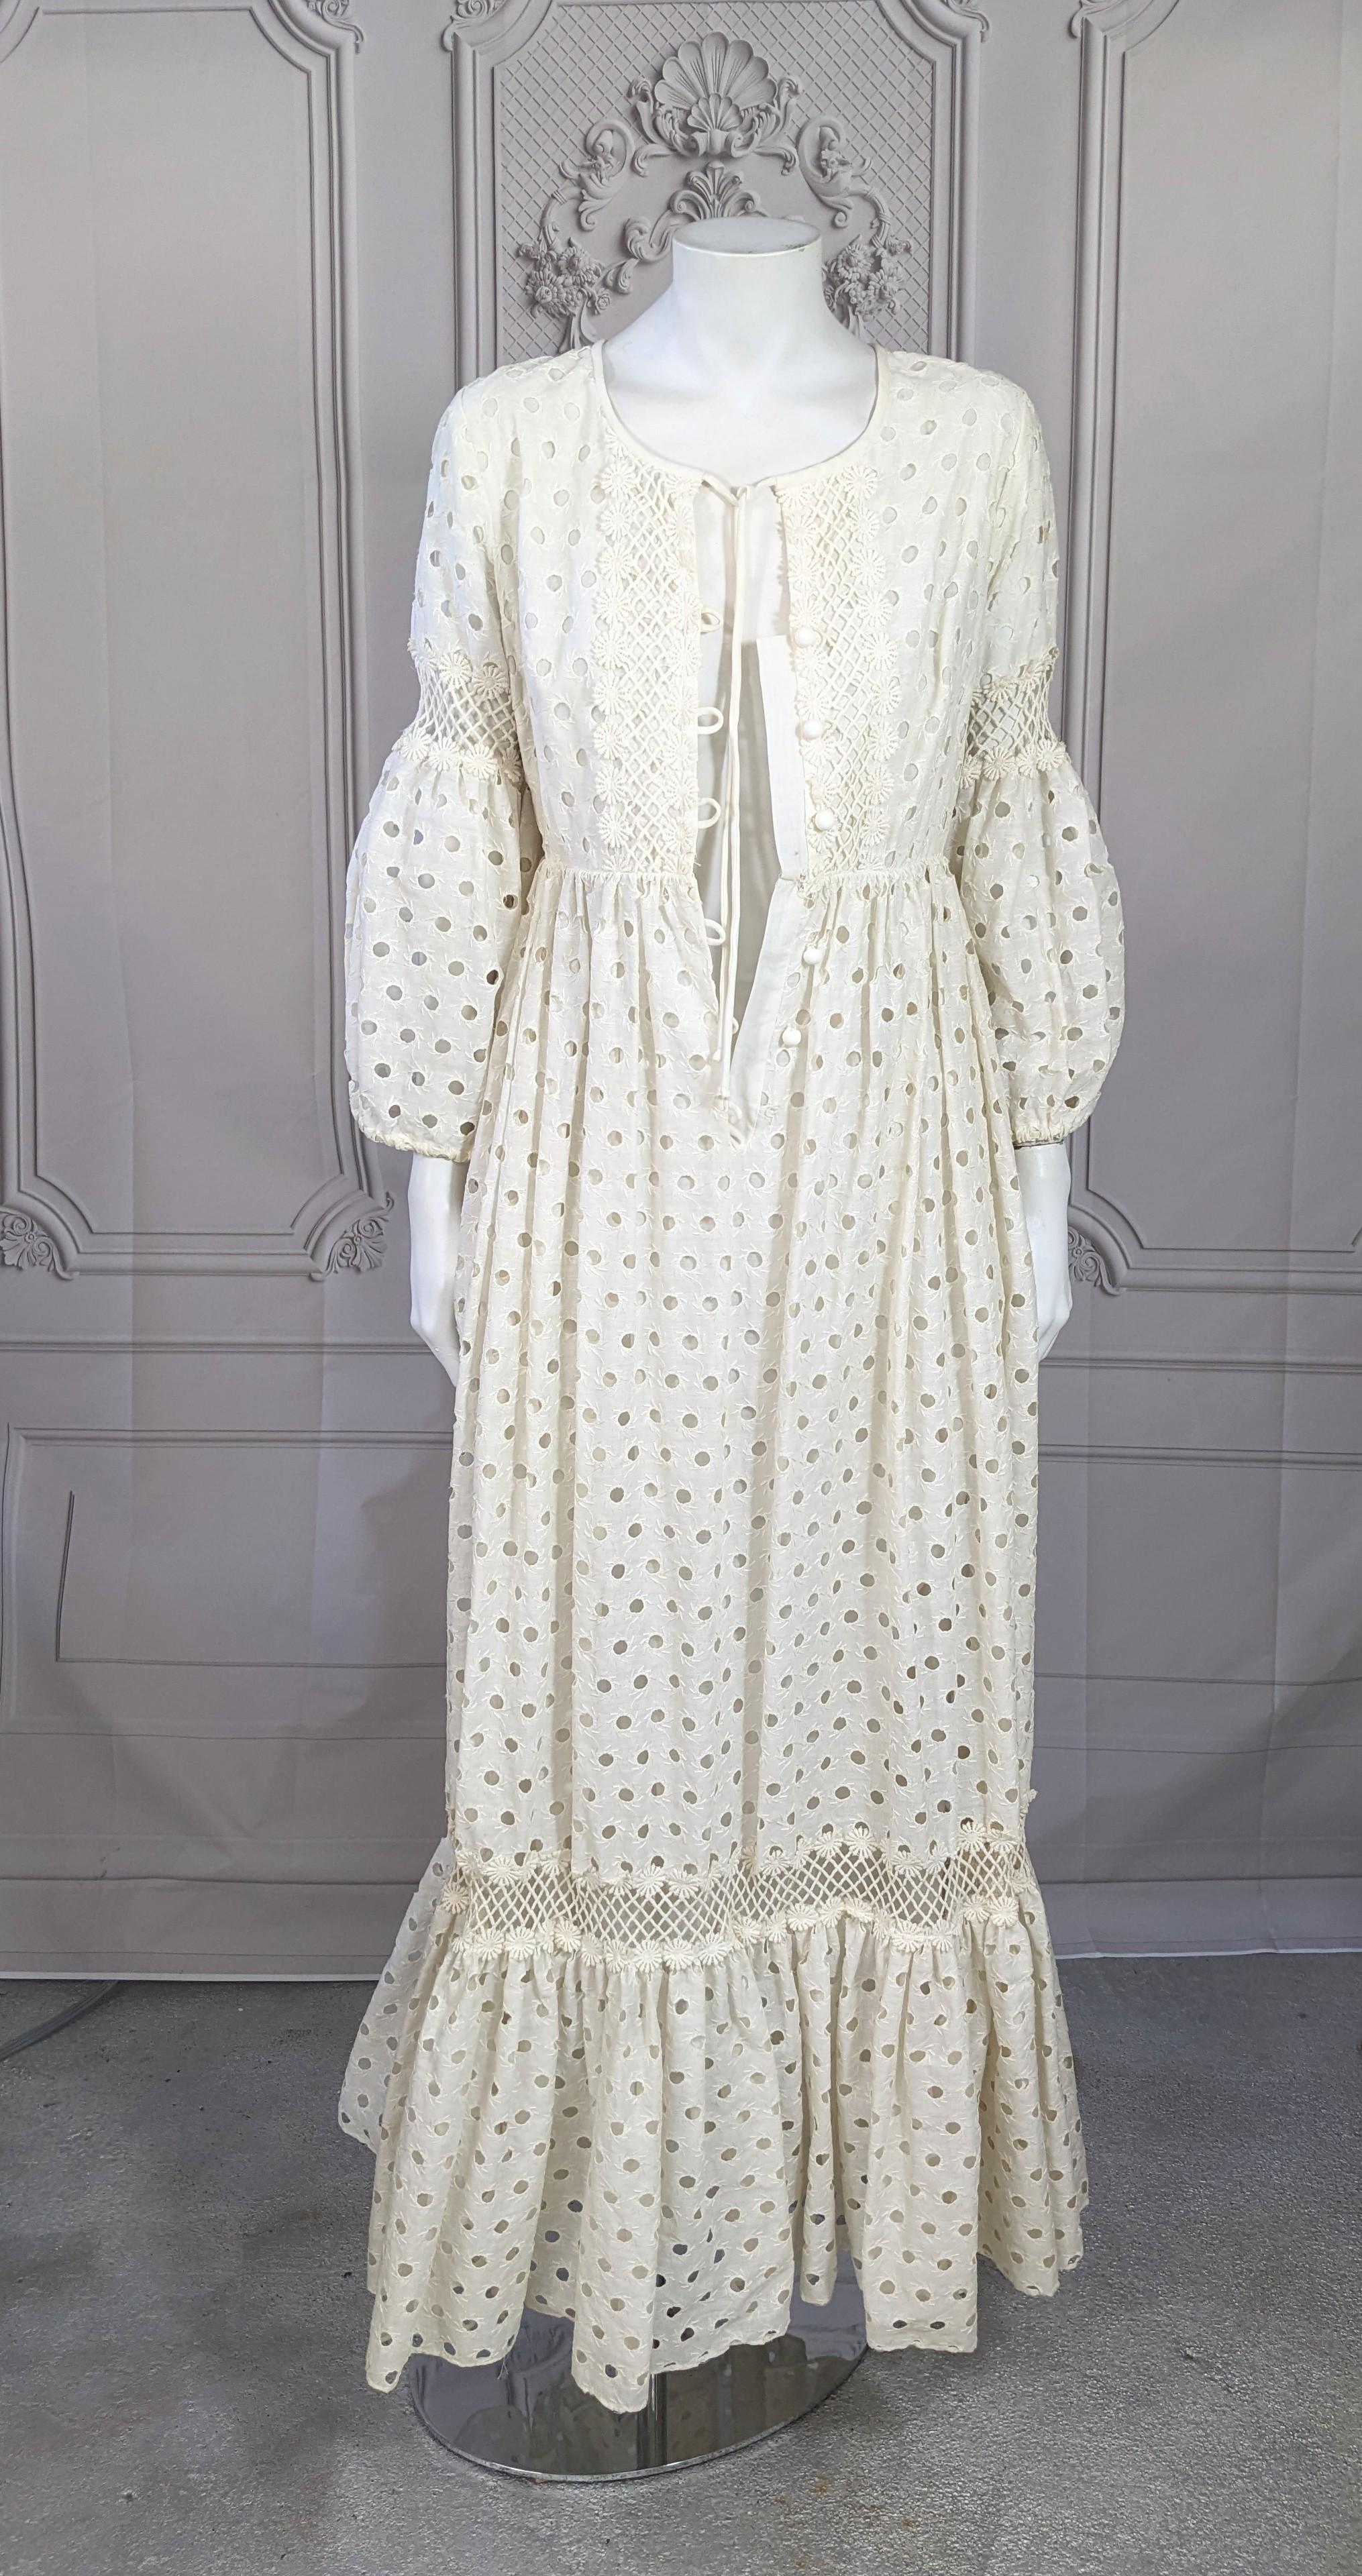 Bohemian Eyelet Lace Maxi Dress In Good Condition For Sale In New York, NY